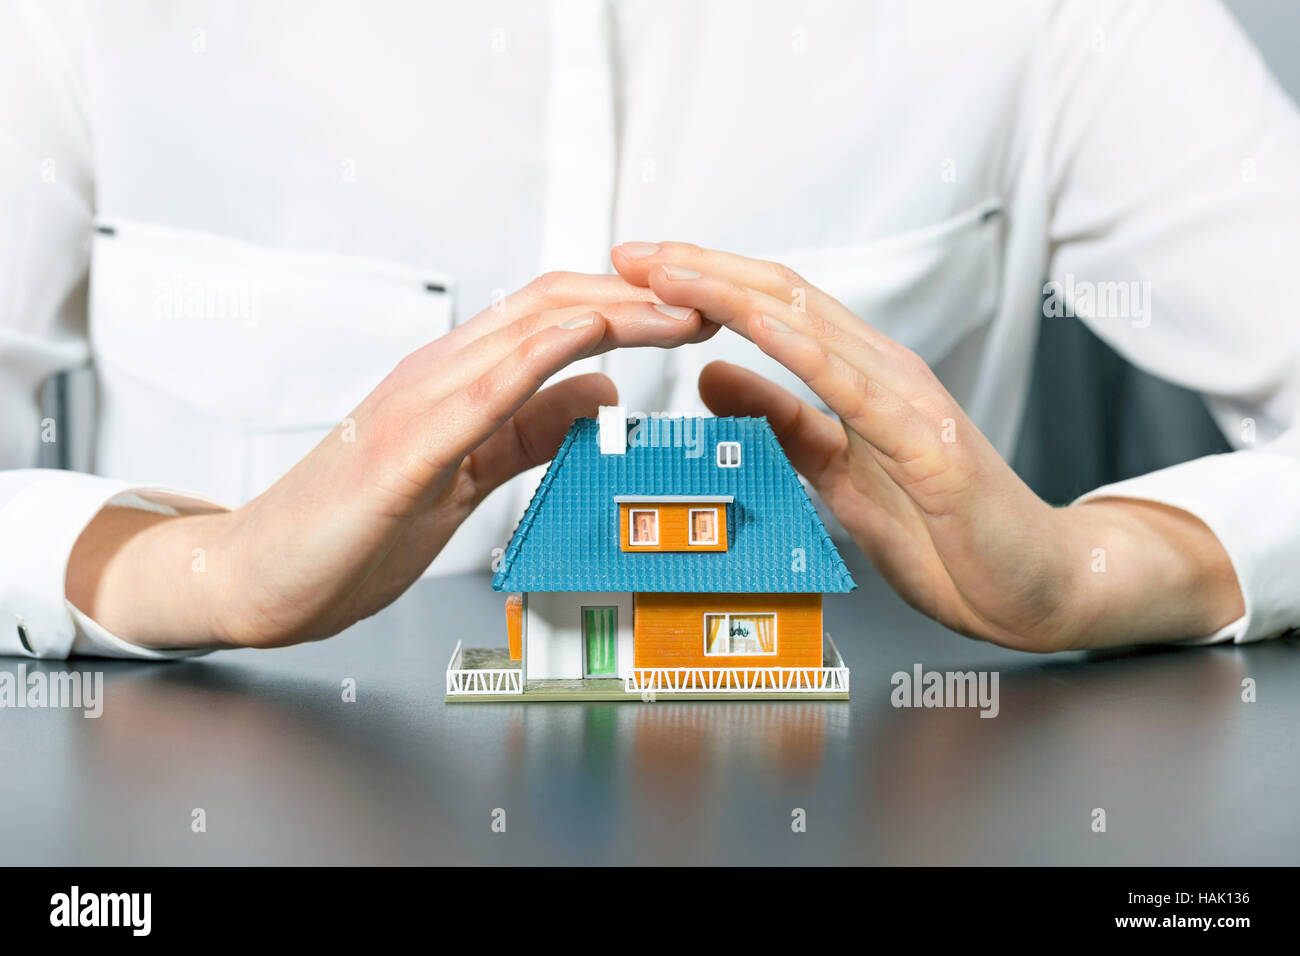 real estate insurance concept - human hands saving small house Stock Photo